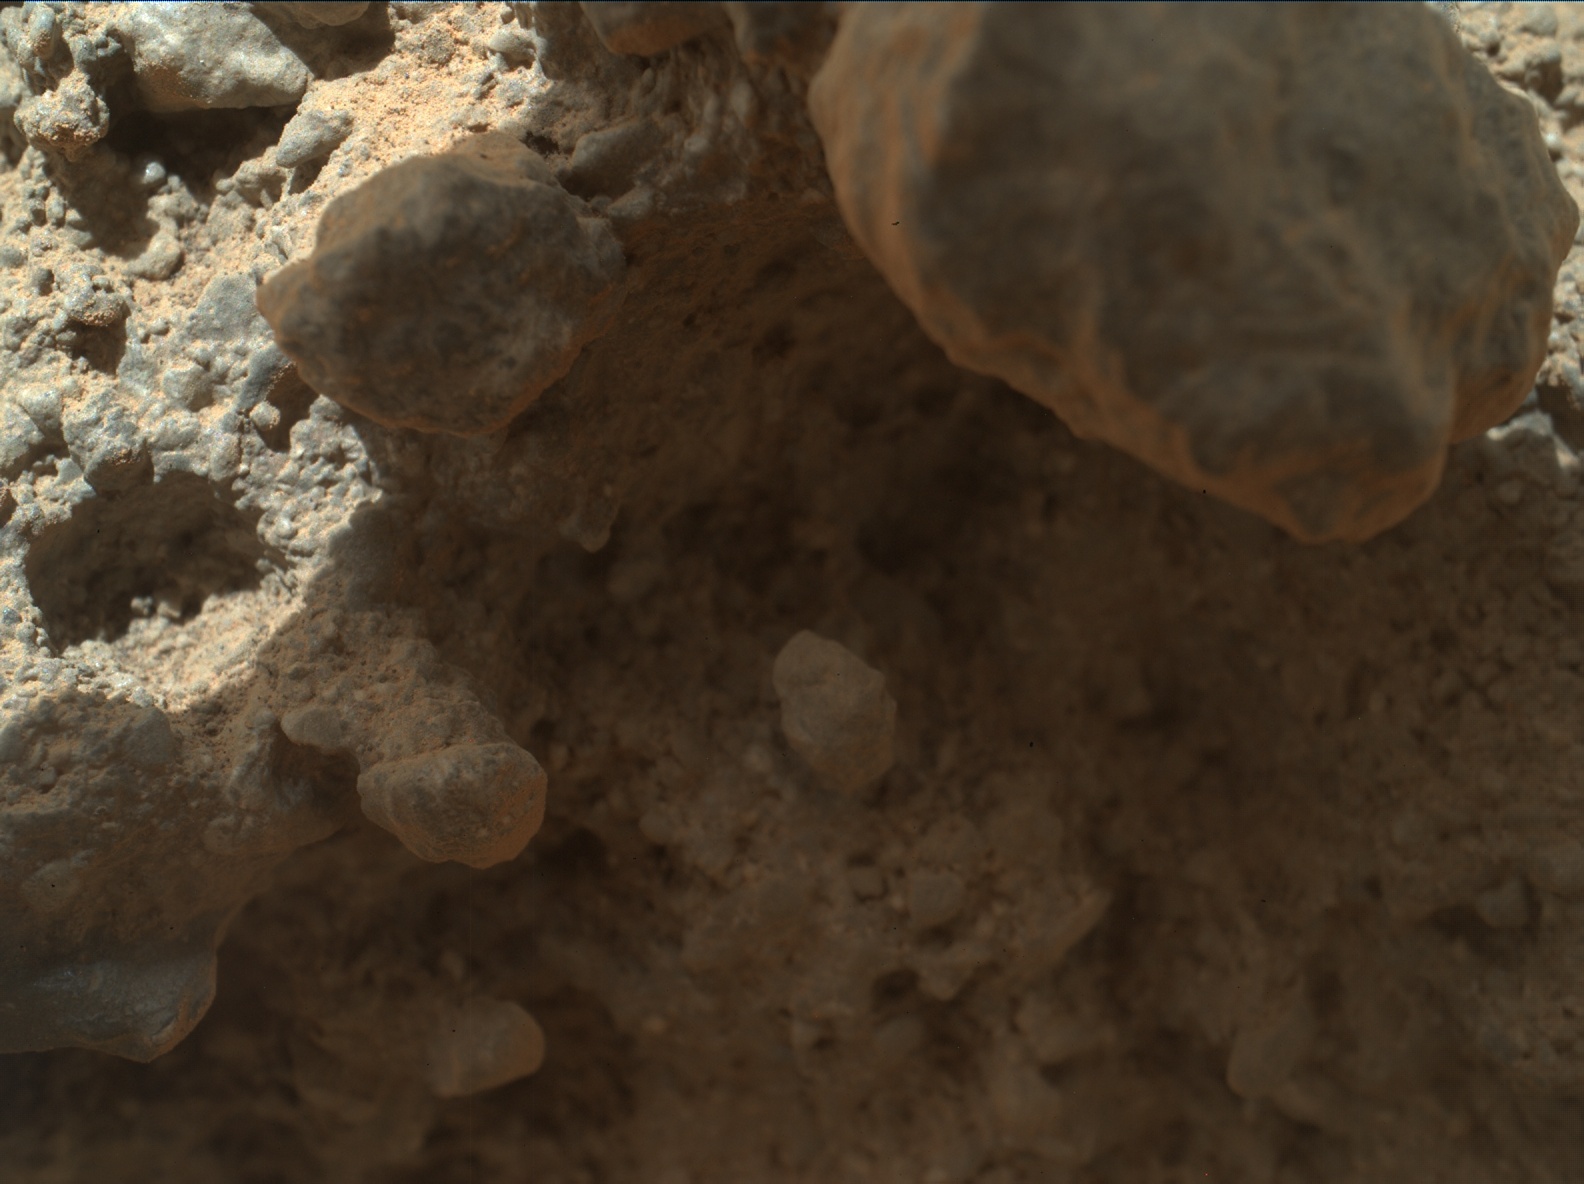 Nasa's Mars rover Curiosity acquired this image using its Mars Hand Lens Imager (MAHLI) on Sol 394